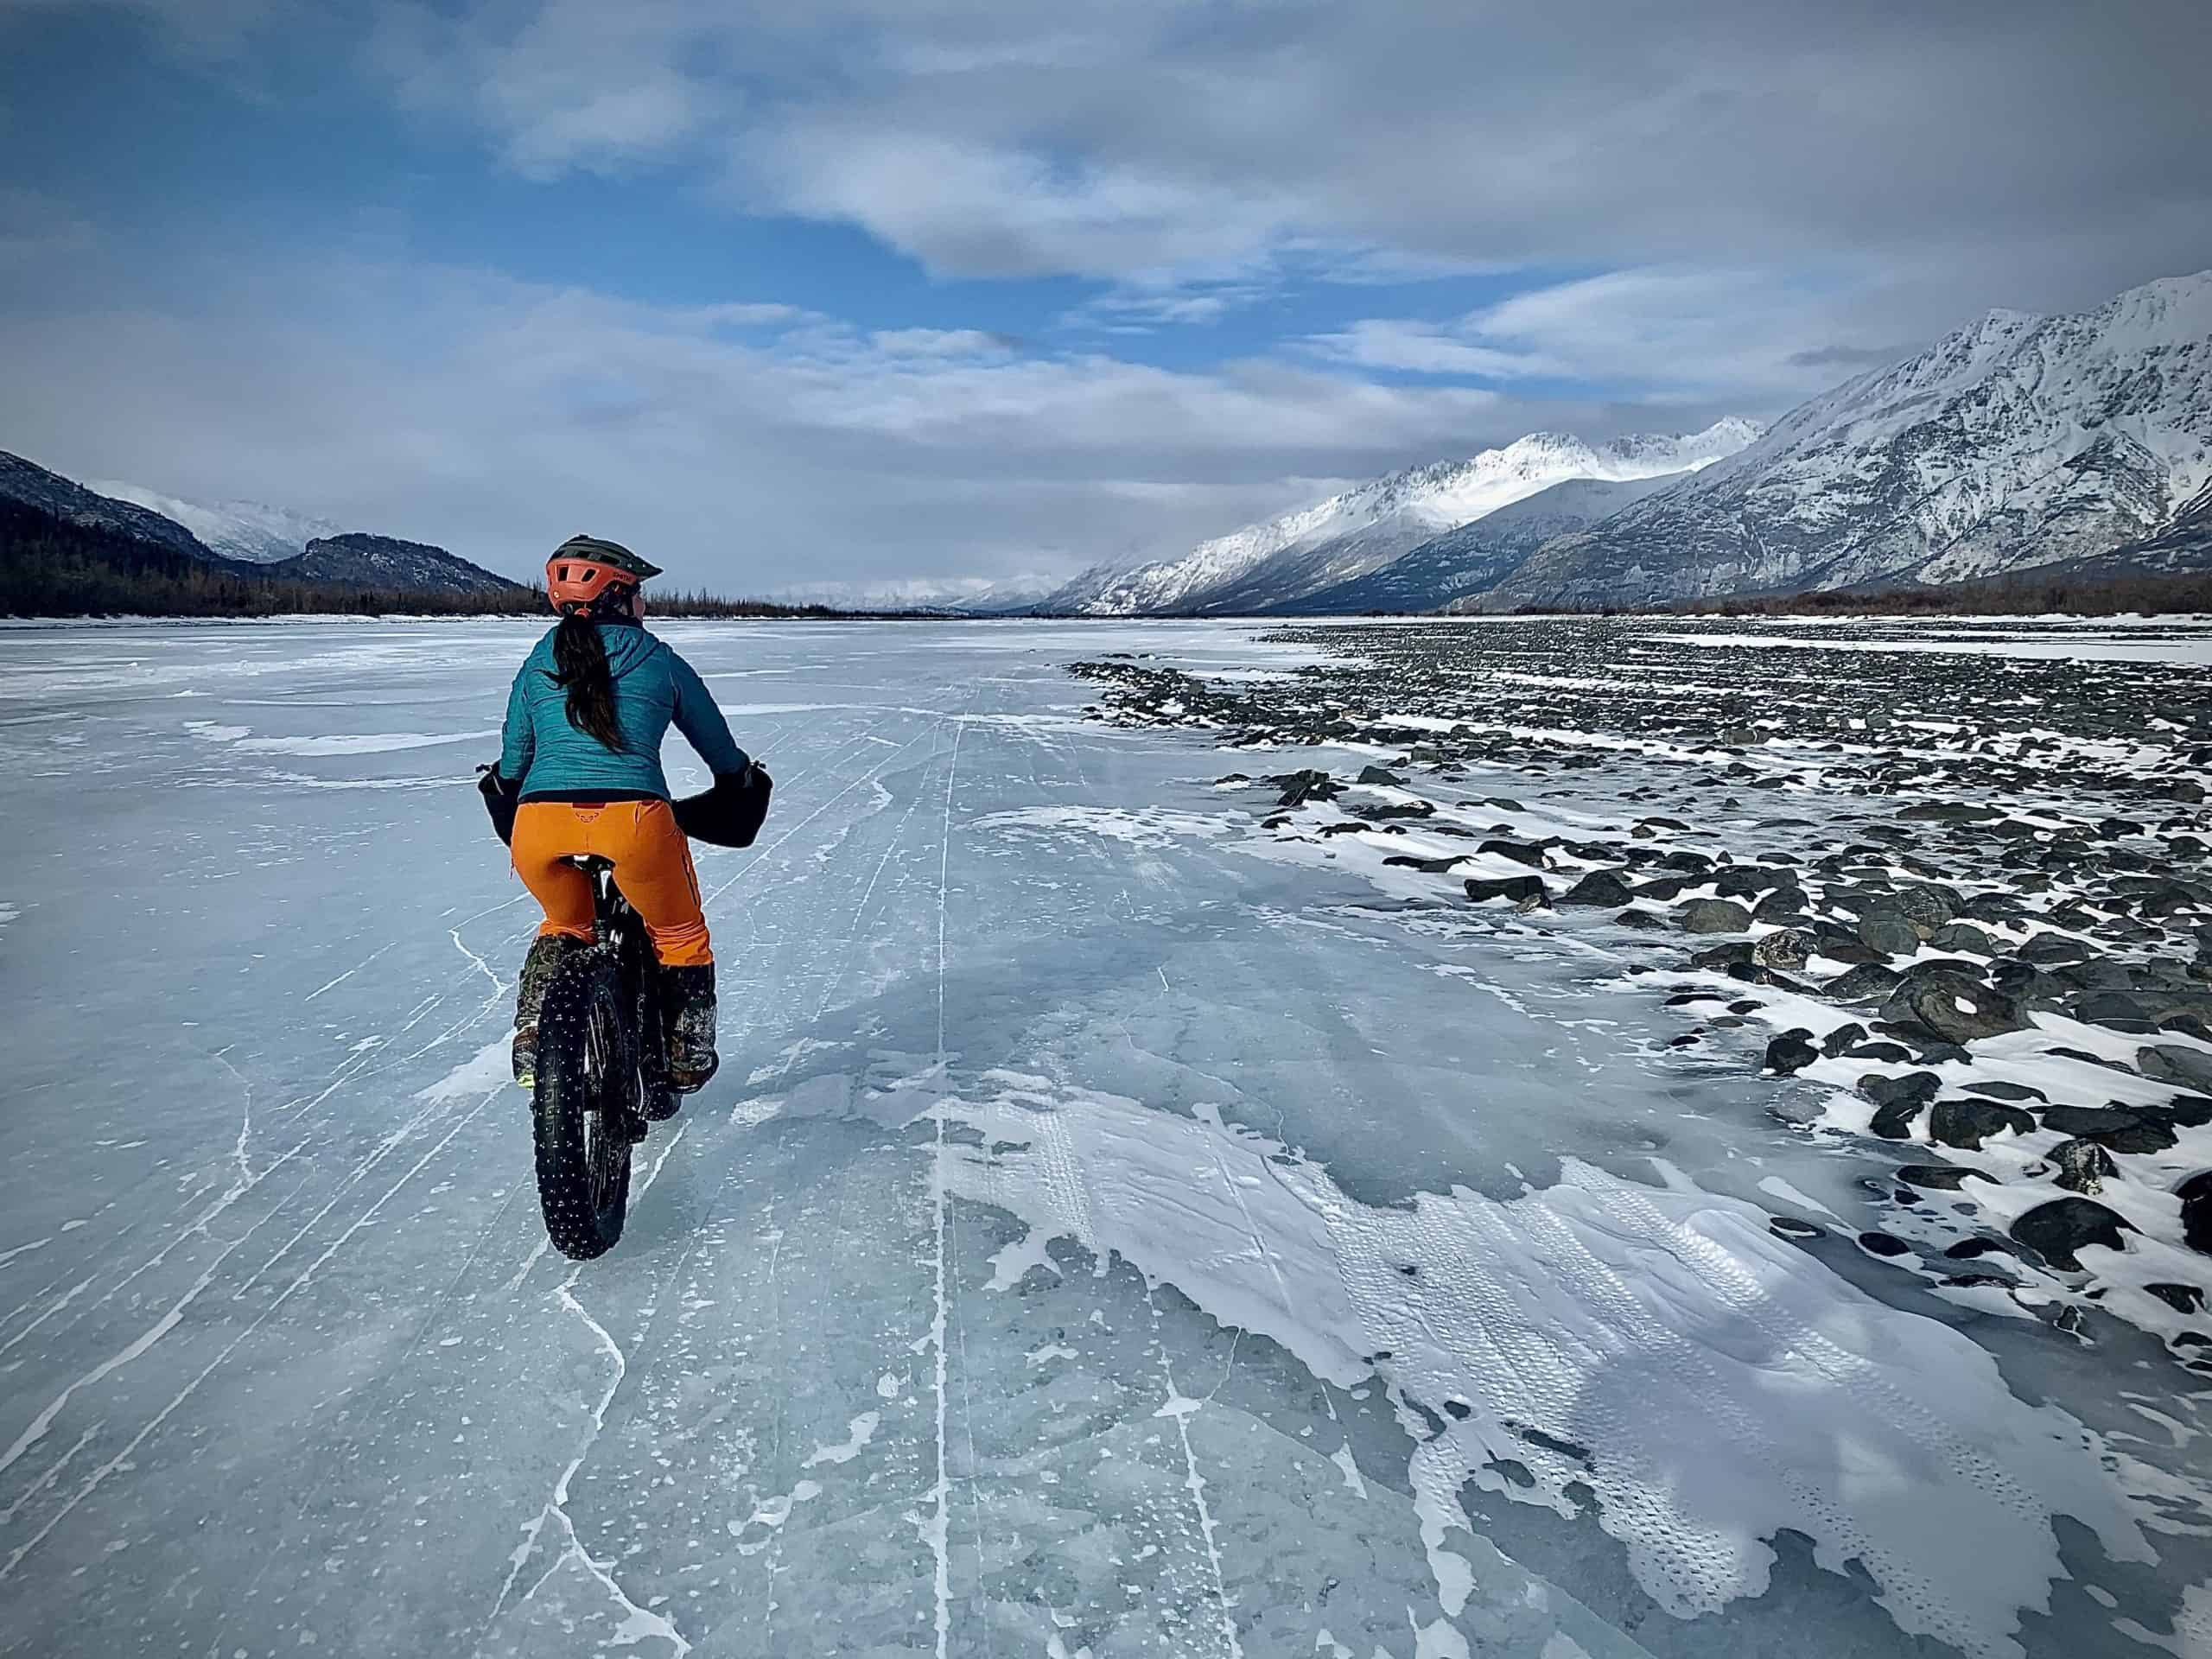 Kelly Willett rides her bike over a frozen lake surrounded by snowy mountains.